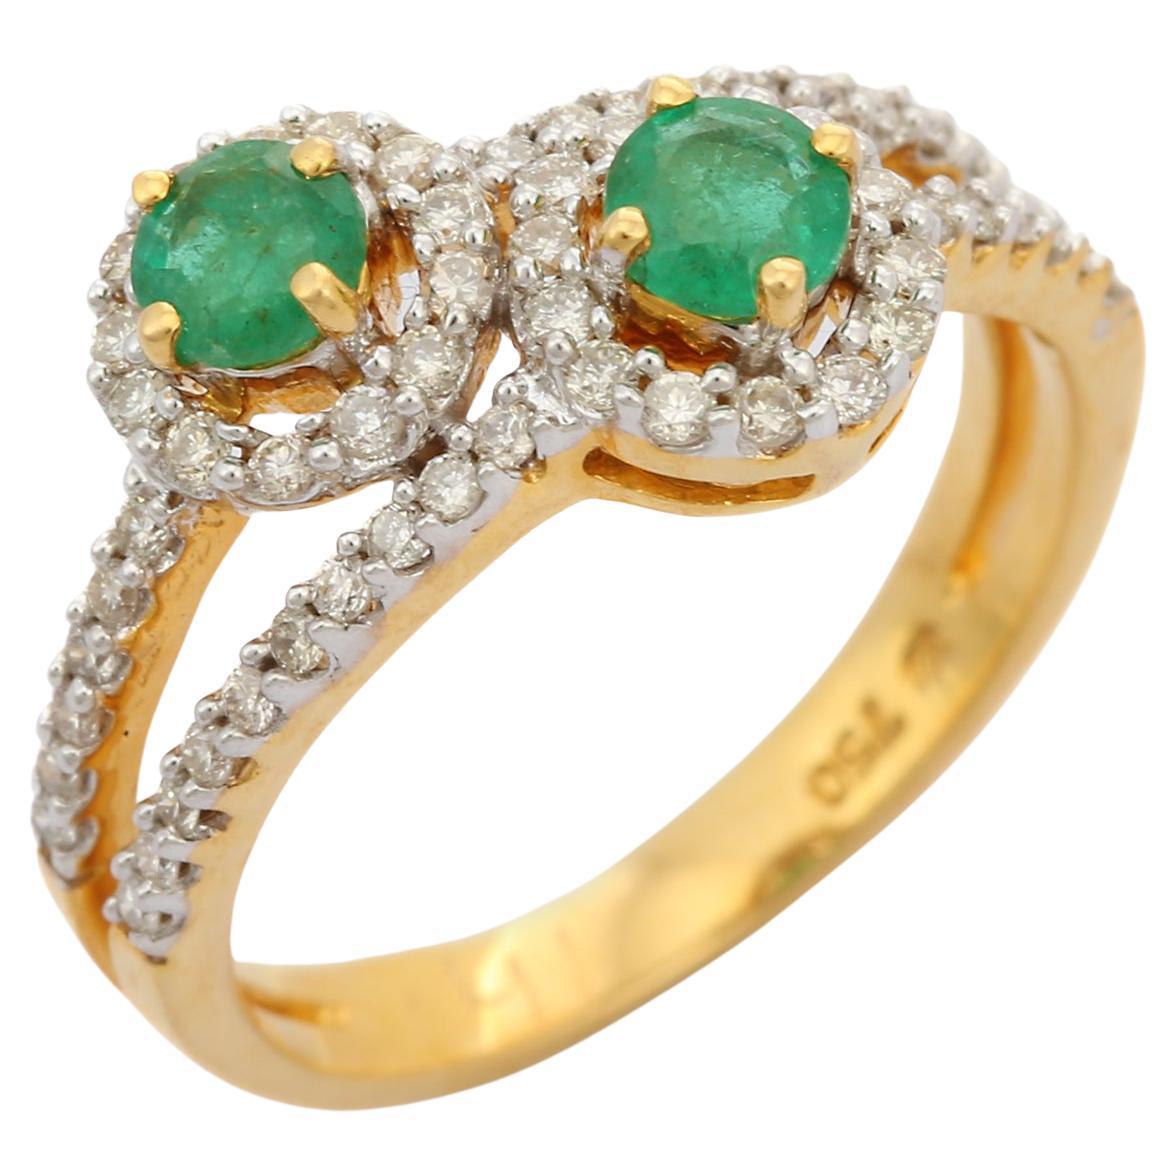 Modernist 18K Yellow Gold Natural Emerald Engagement Ring with Diamonds